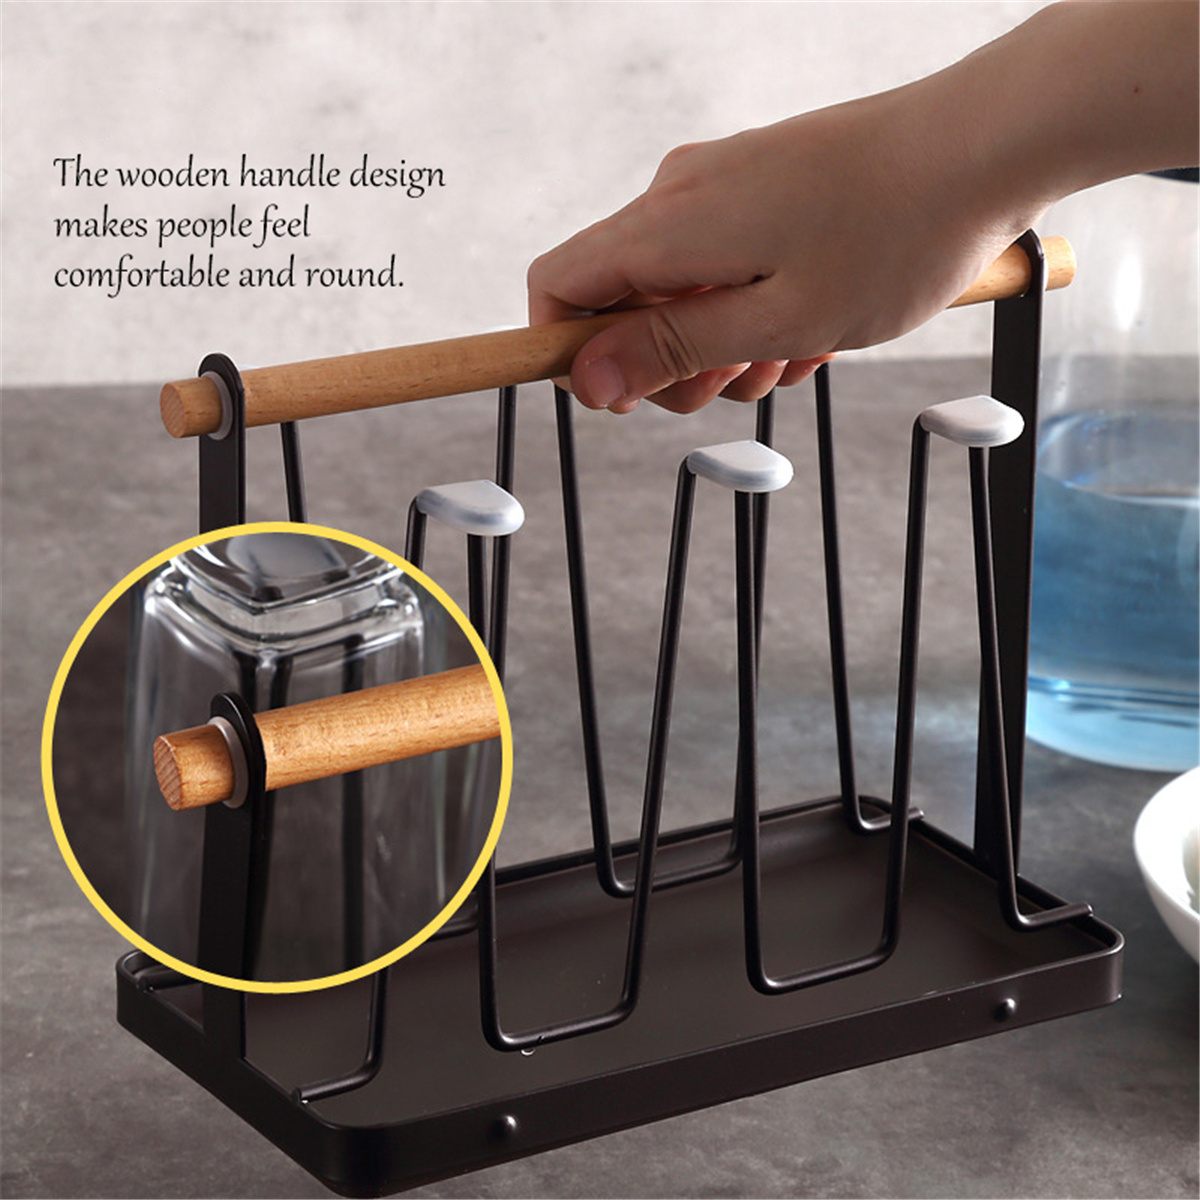 Wrought-Iron-Upside-Down-Drain-Japanese-Style-Cup-Holder-Water-Cup-Mug-Storage-Rack-Drain-Rack-1722859-4